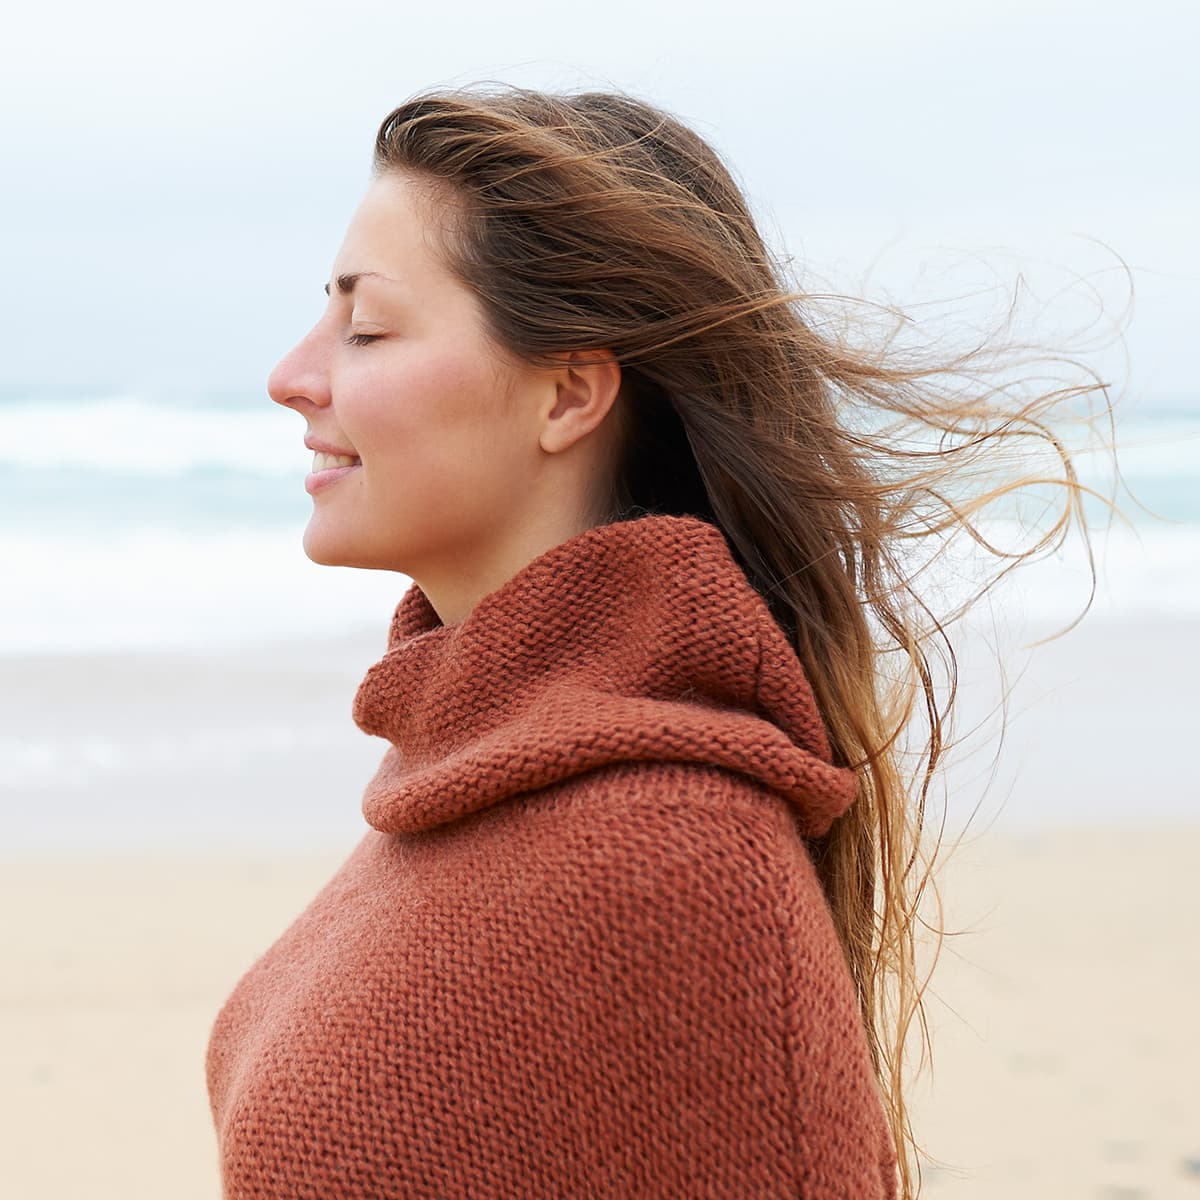 Woman smiling on the beach.